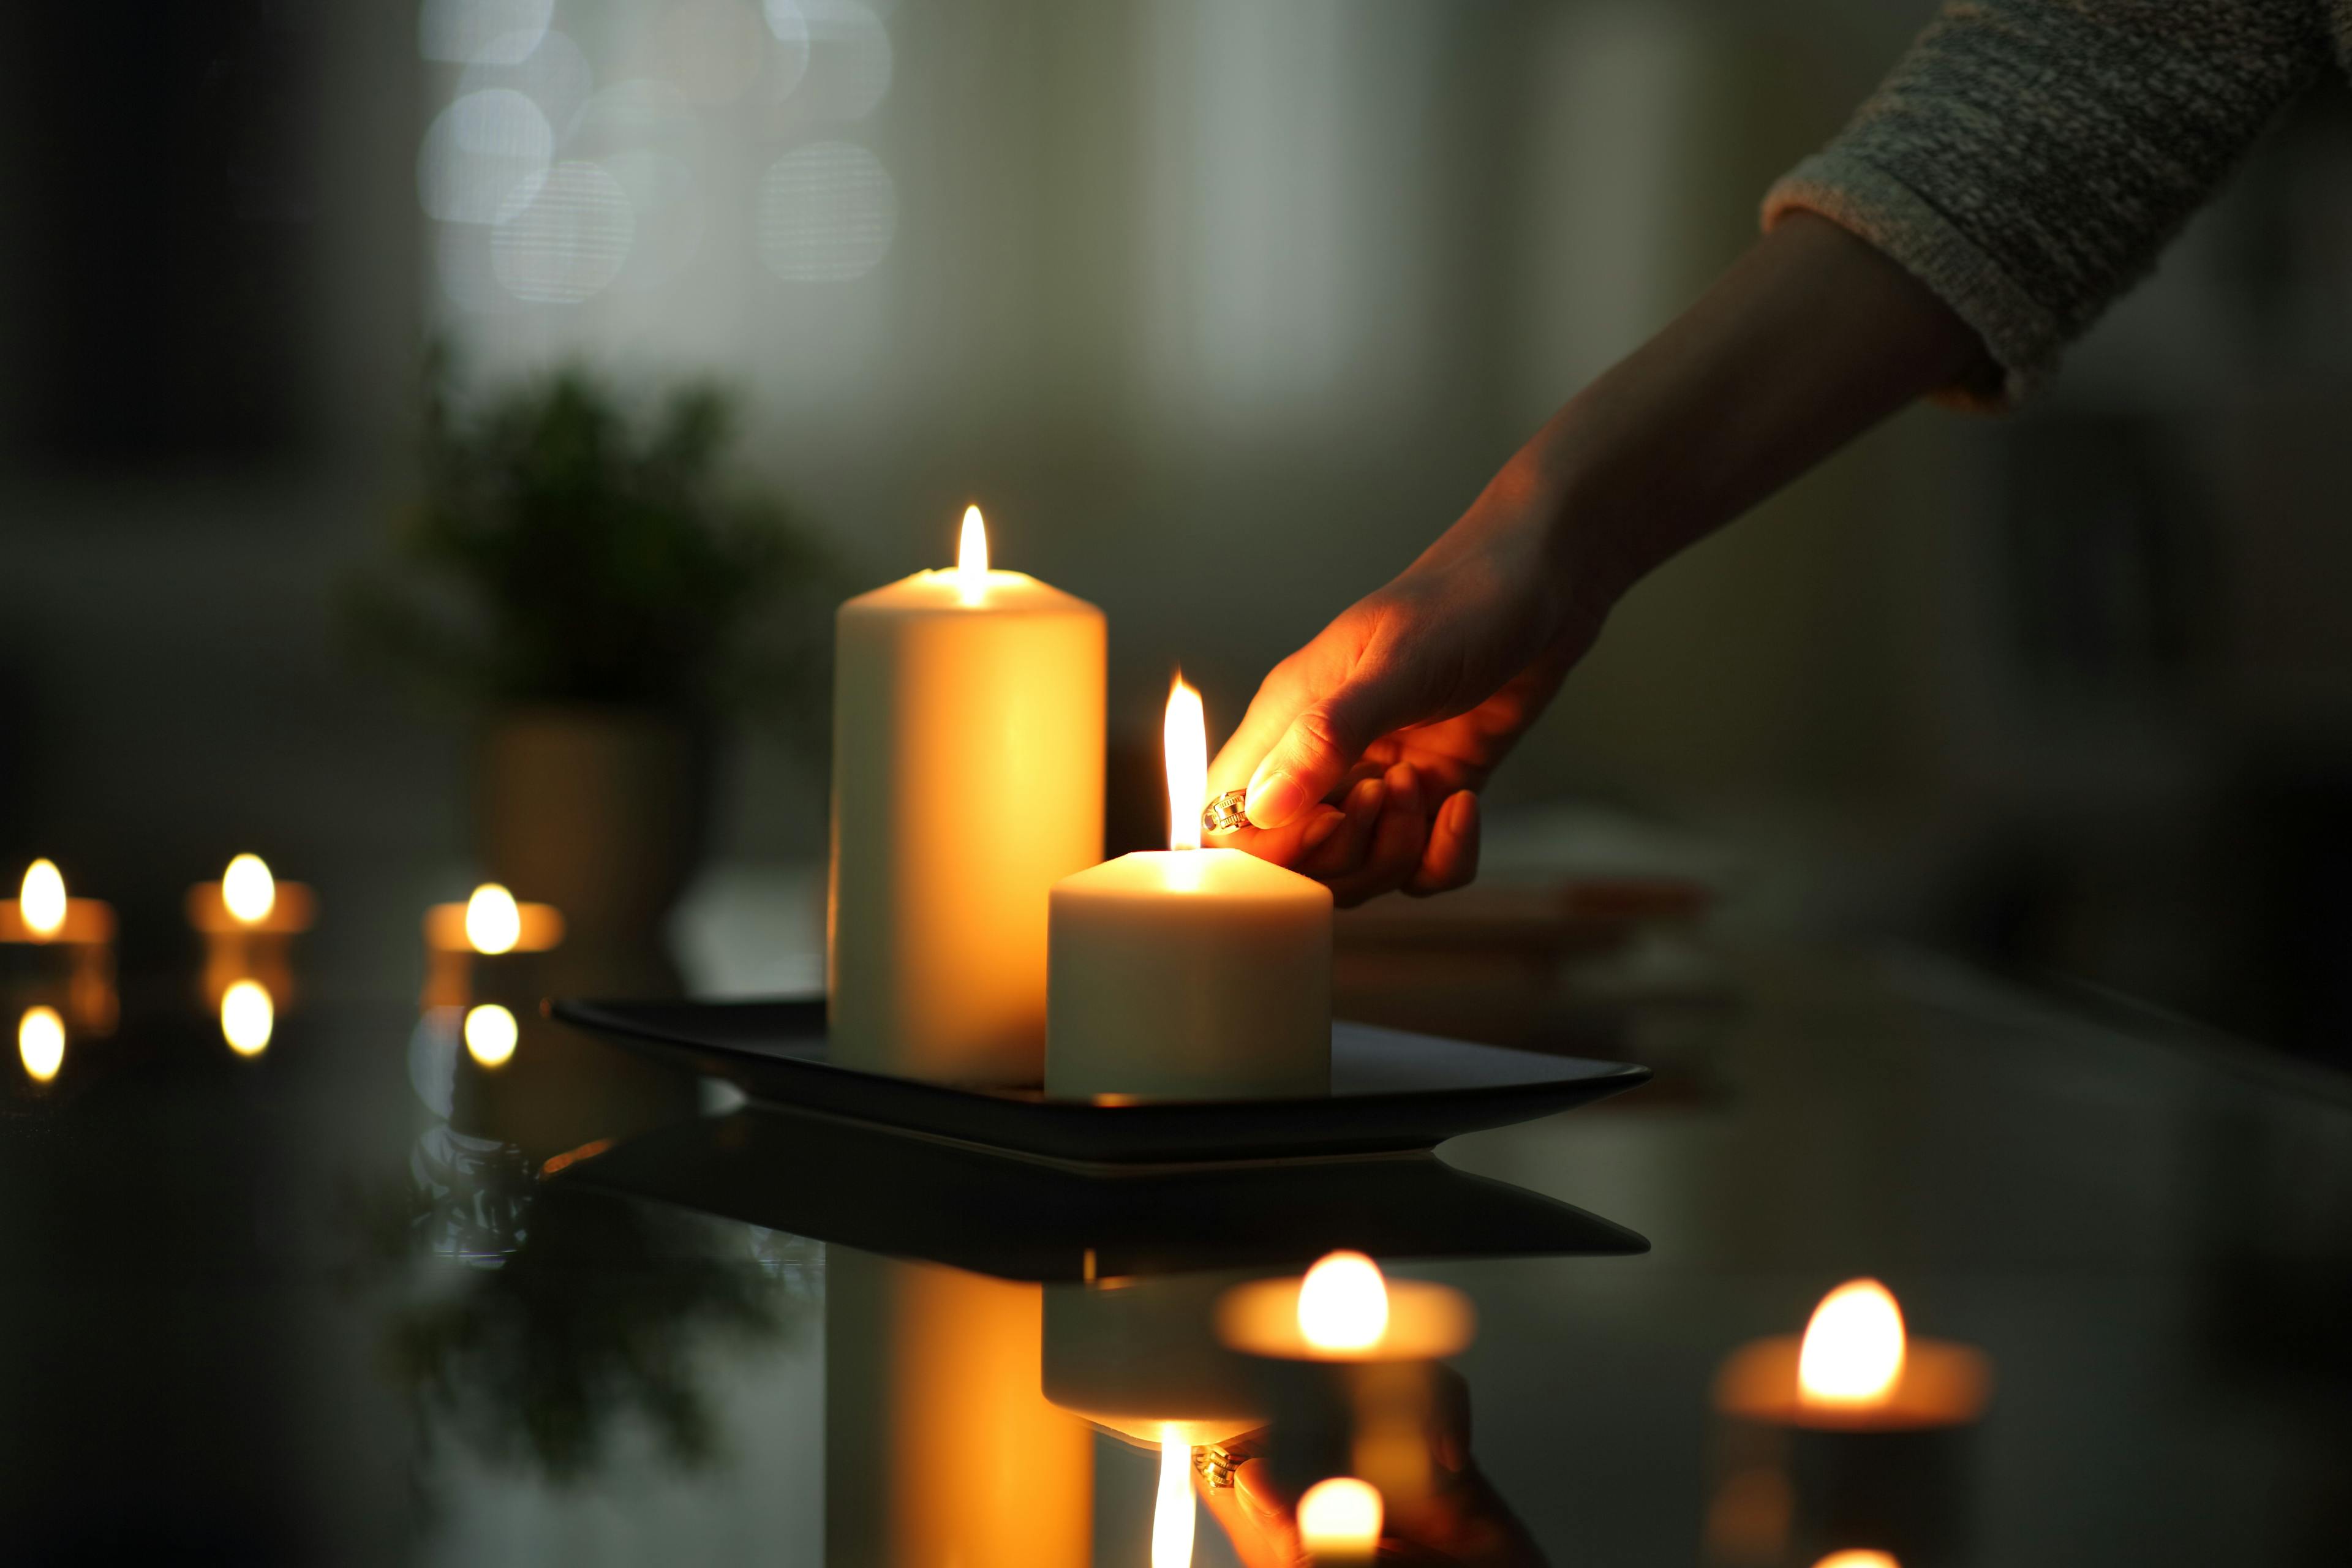 Beware of Blackouts: 6 Ways Caregivers Can Prepare for Power Outages